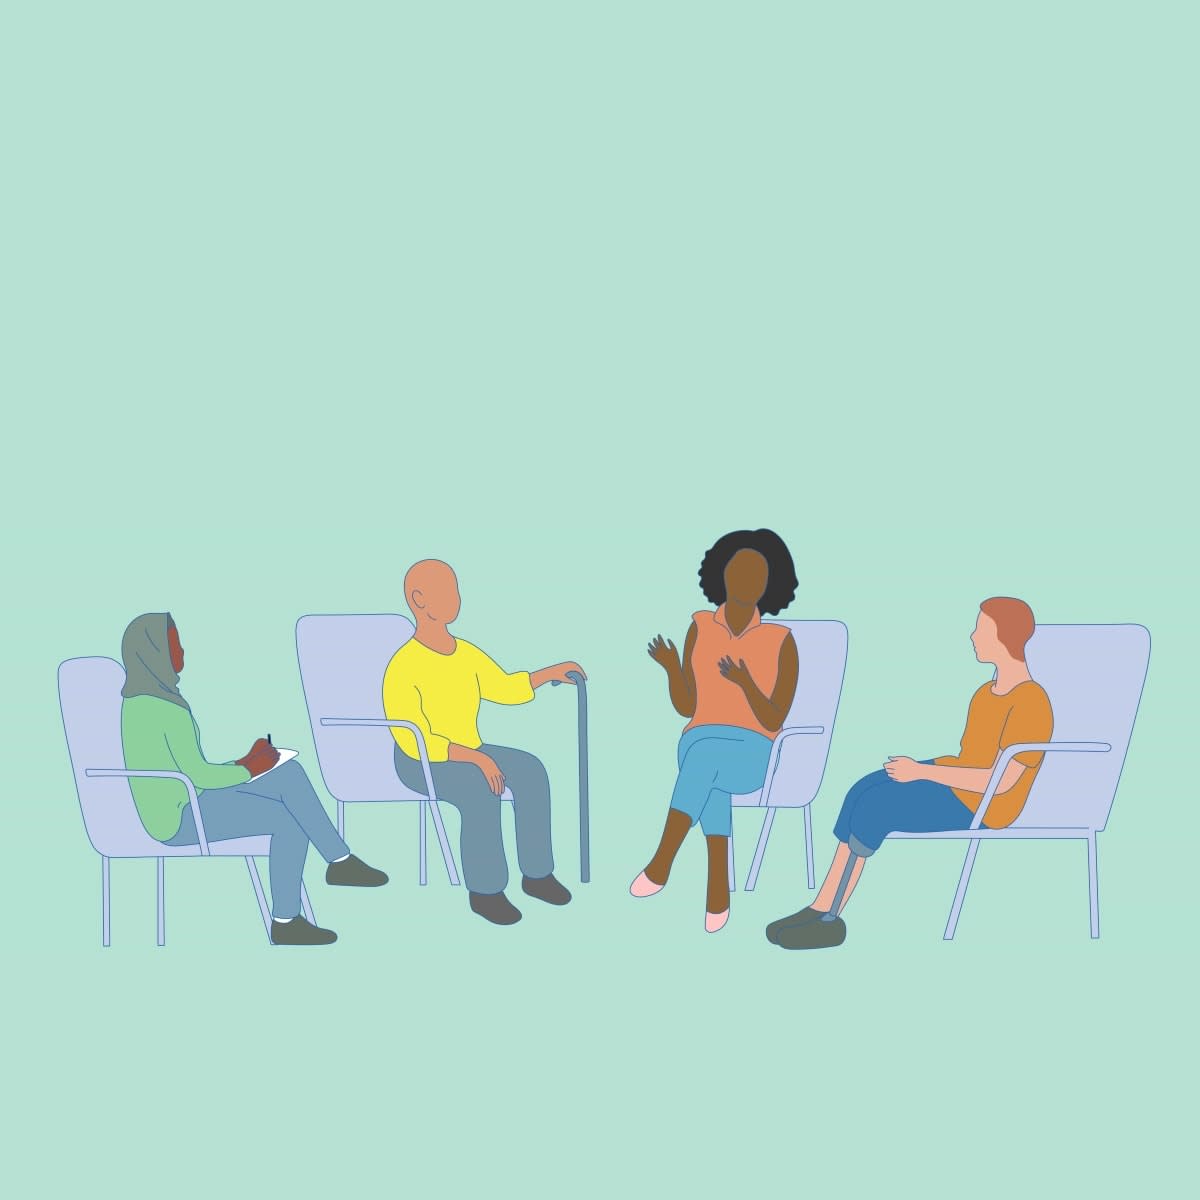 Four people sitting on chairs talking (1)